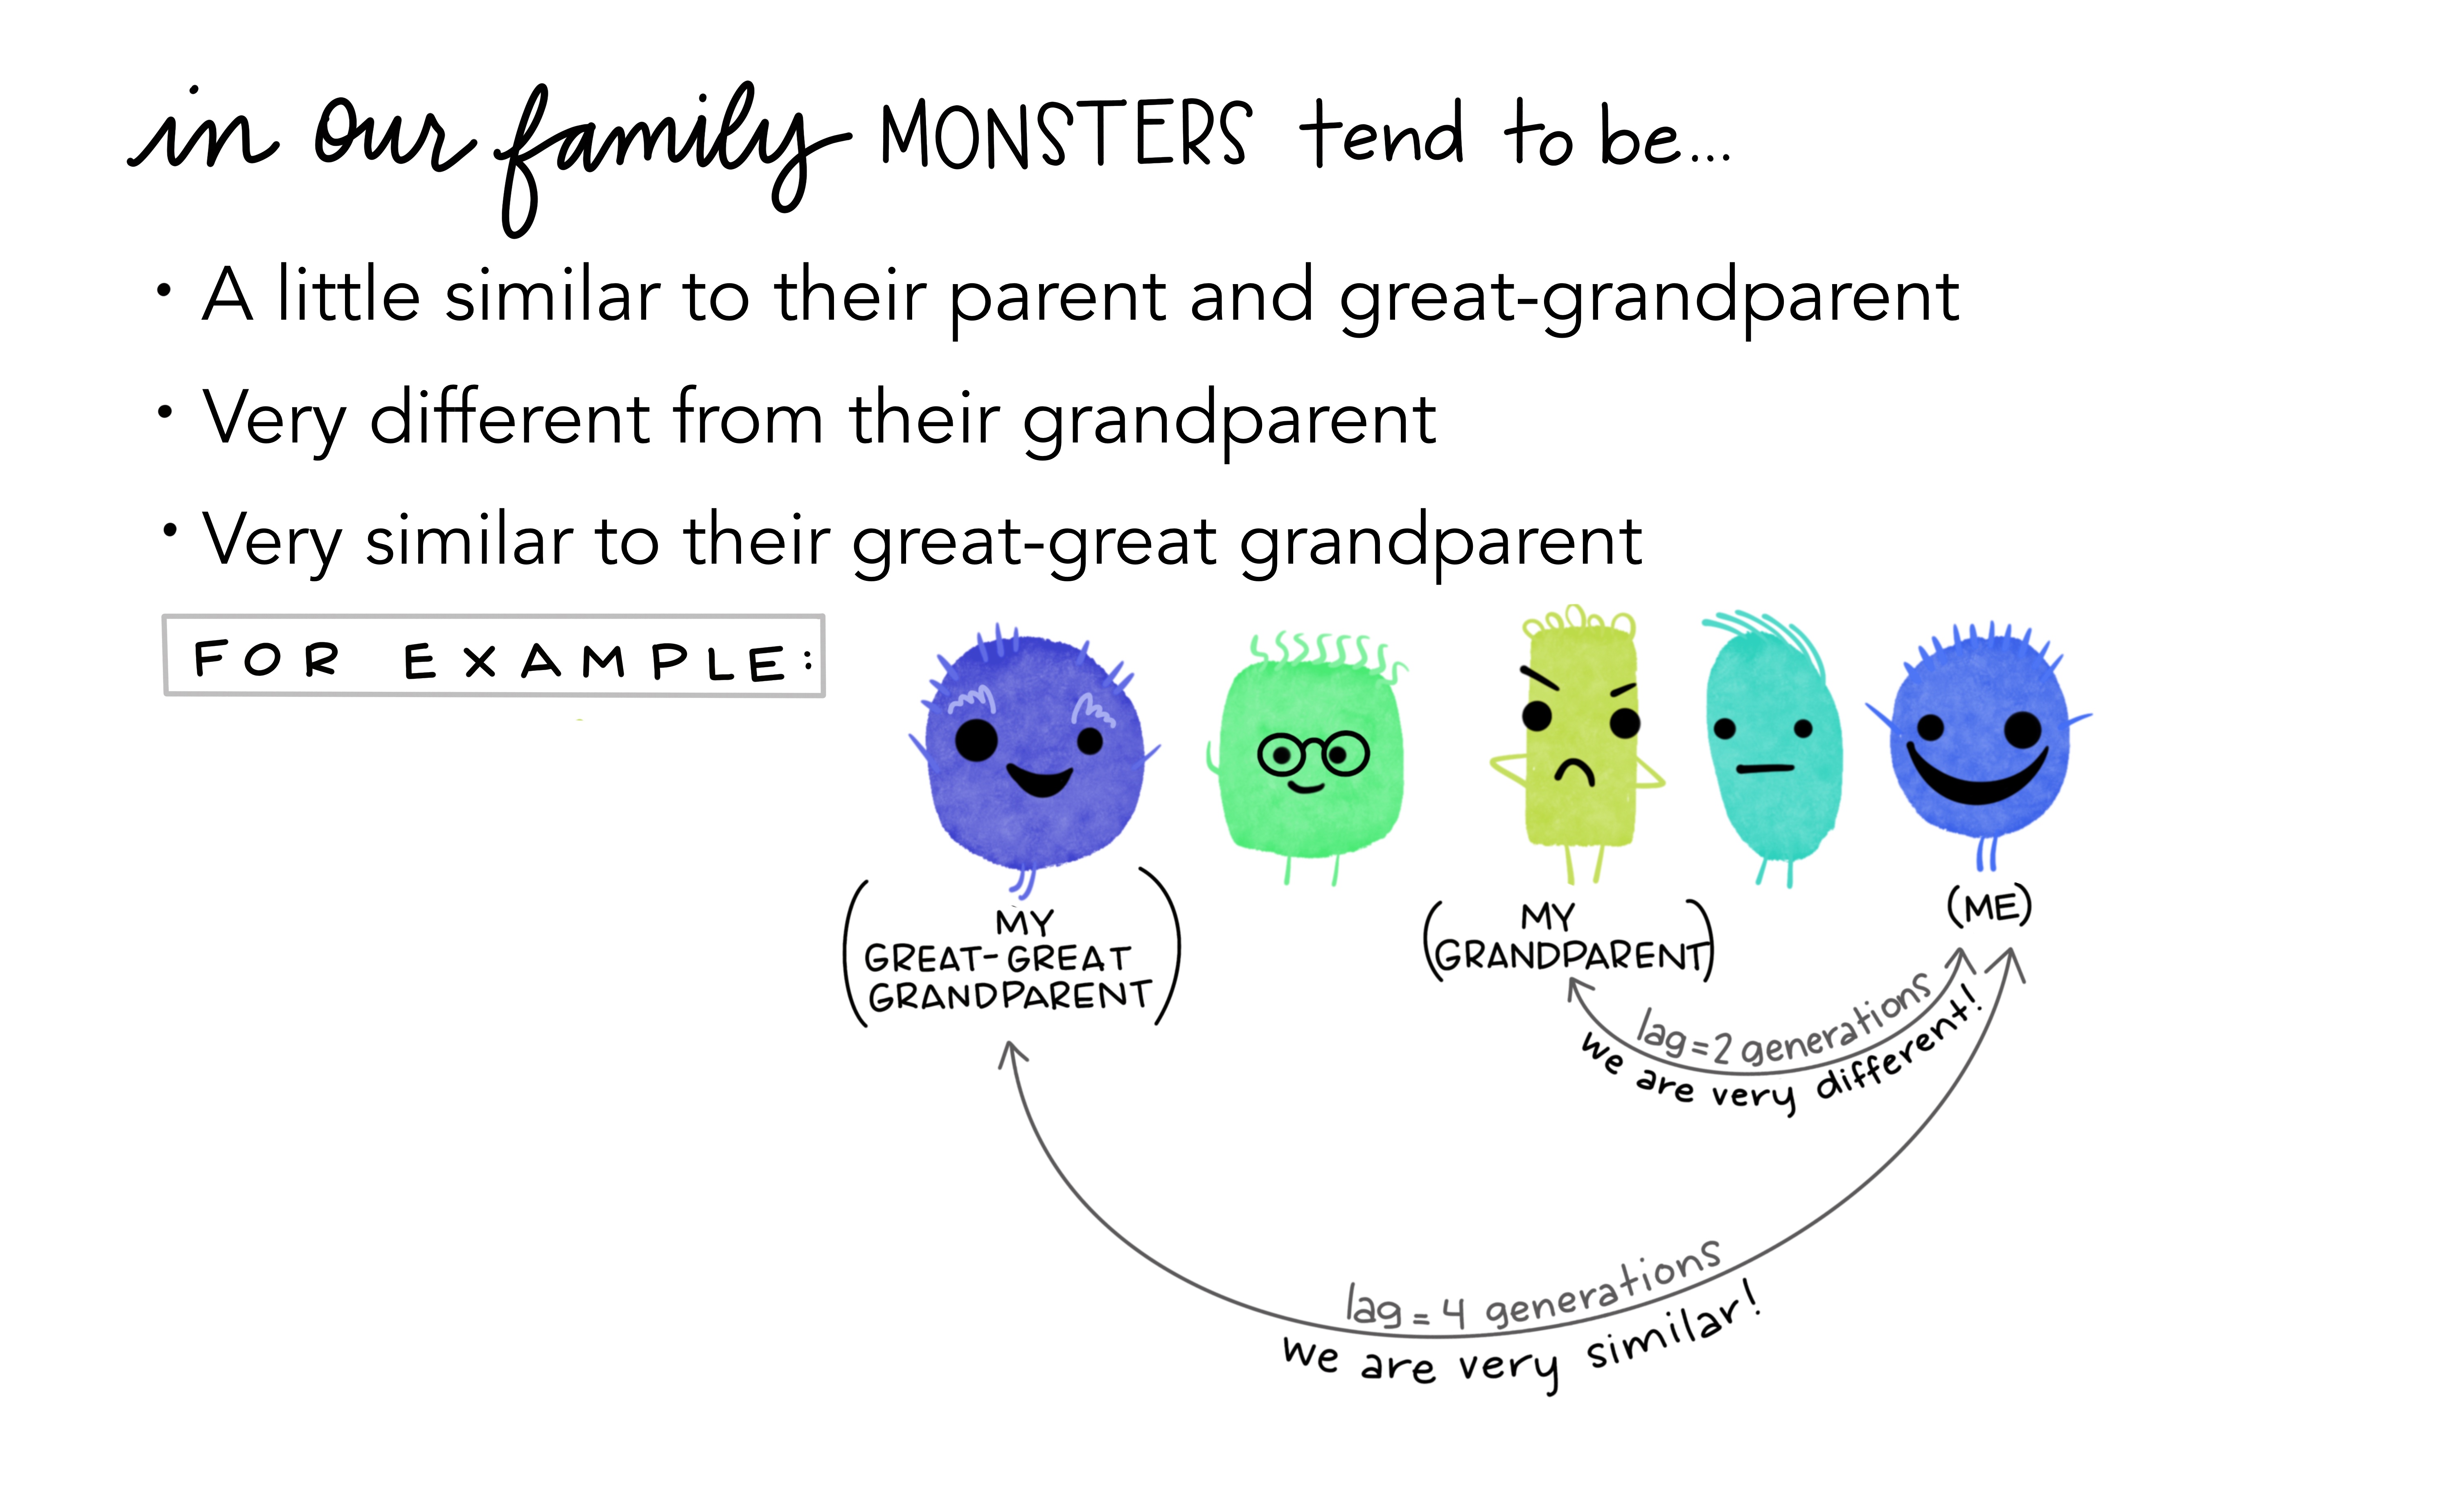 A friendly looking ancestral line of five monsters of simple shapes and varying color, from “My great-great grandparent” on the left to “Me!” on the right. Text says “In our family monsters tend to be a little similar to their parent and great-grandparent, very different from their grandparent, very similar to their great-great grandparent.